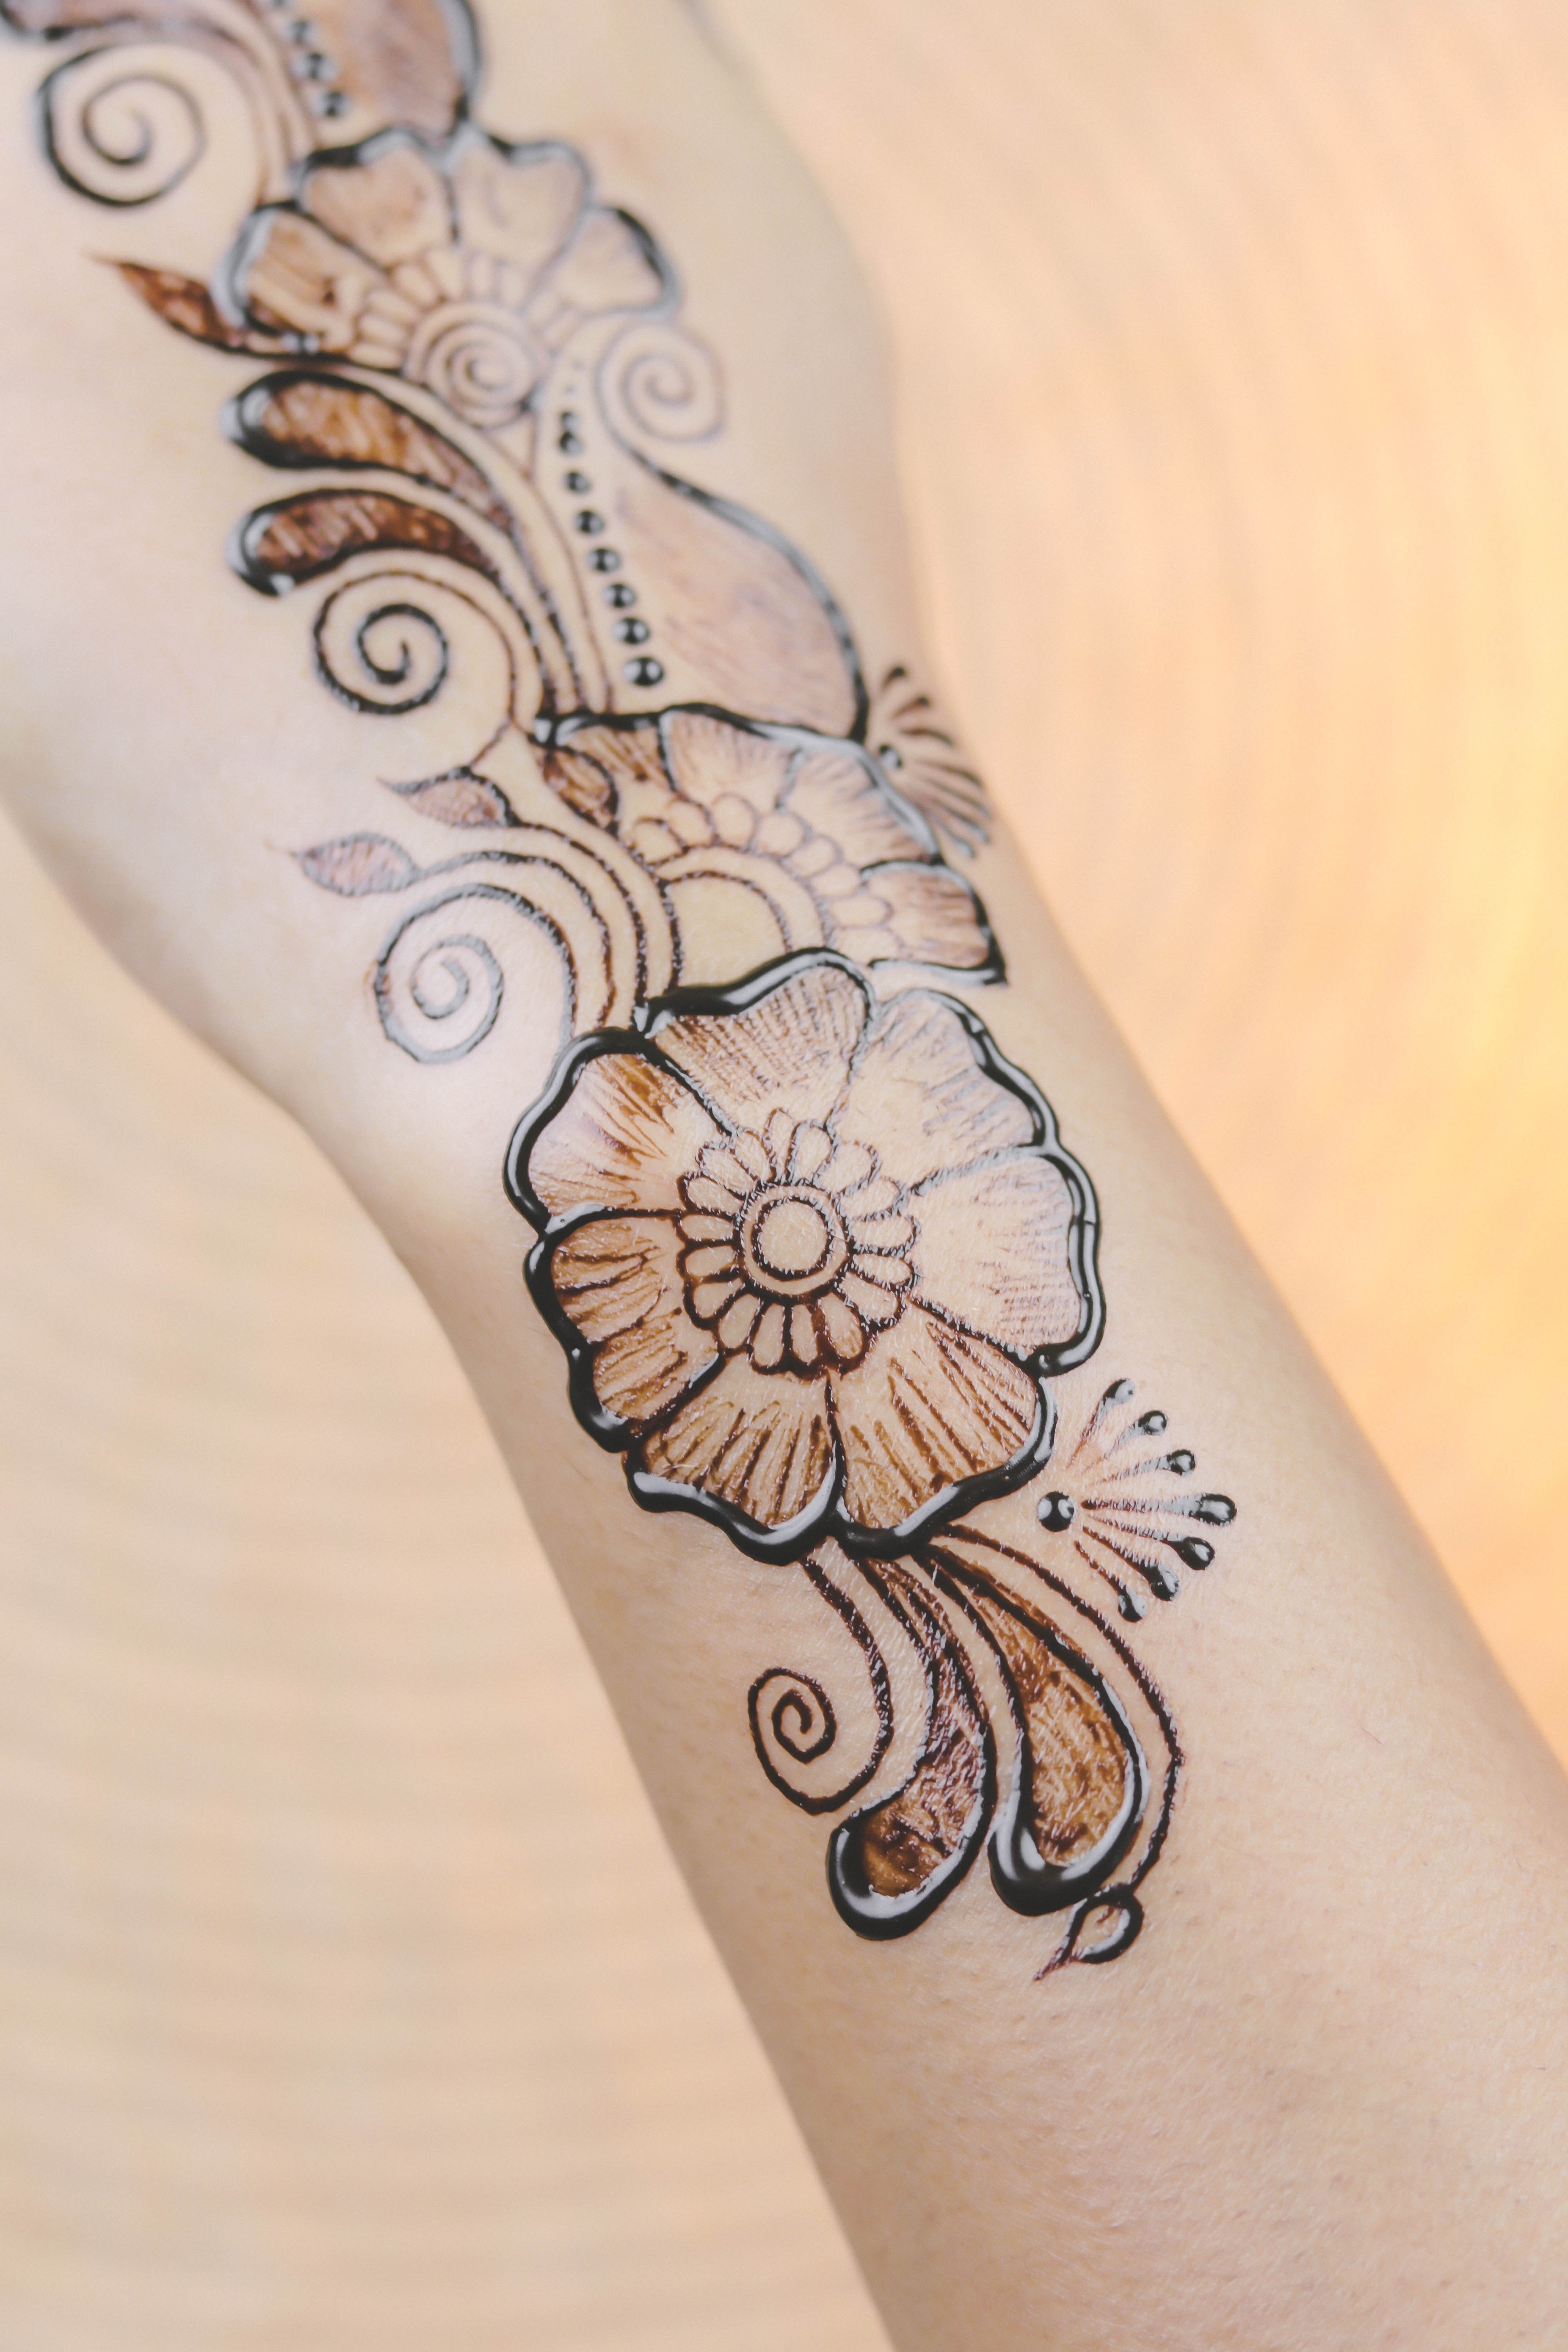 Temporary Metallic Tattoos: As Pretty As Can Be